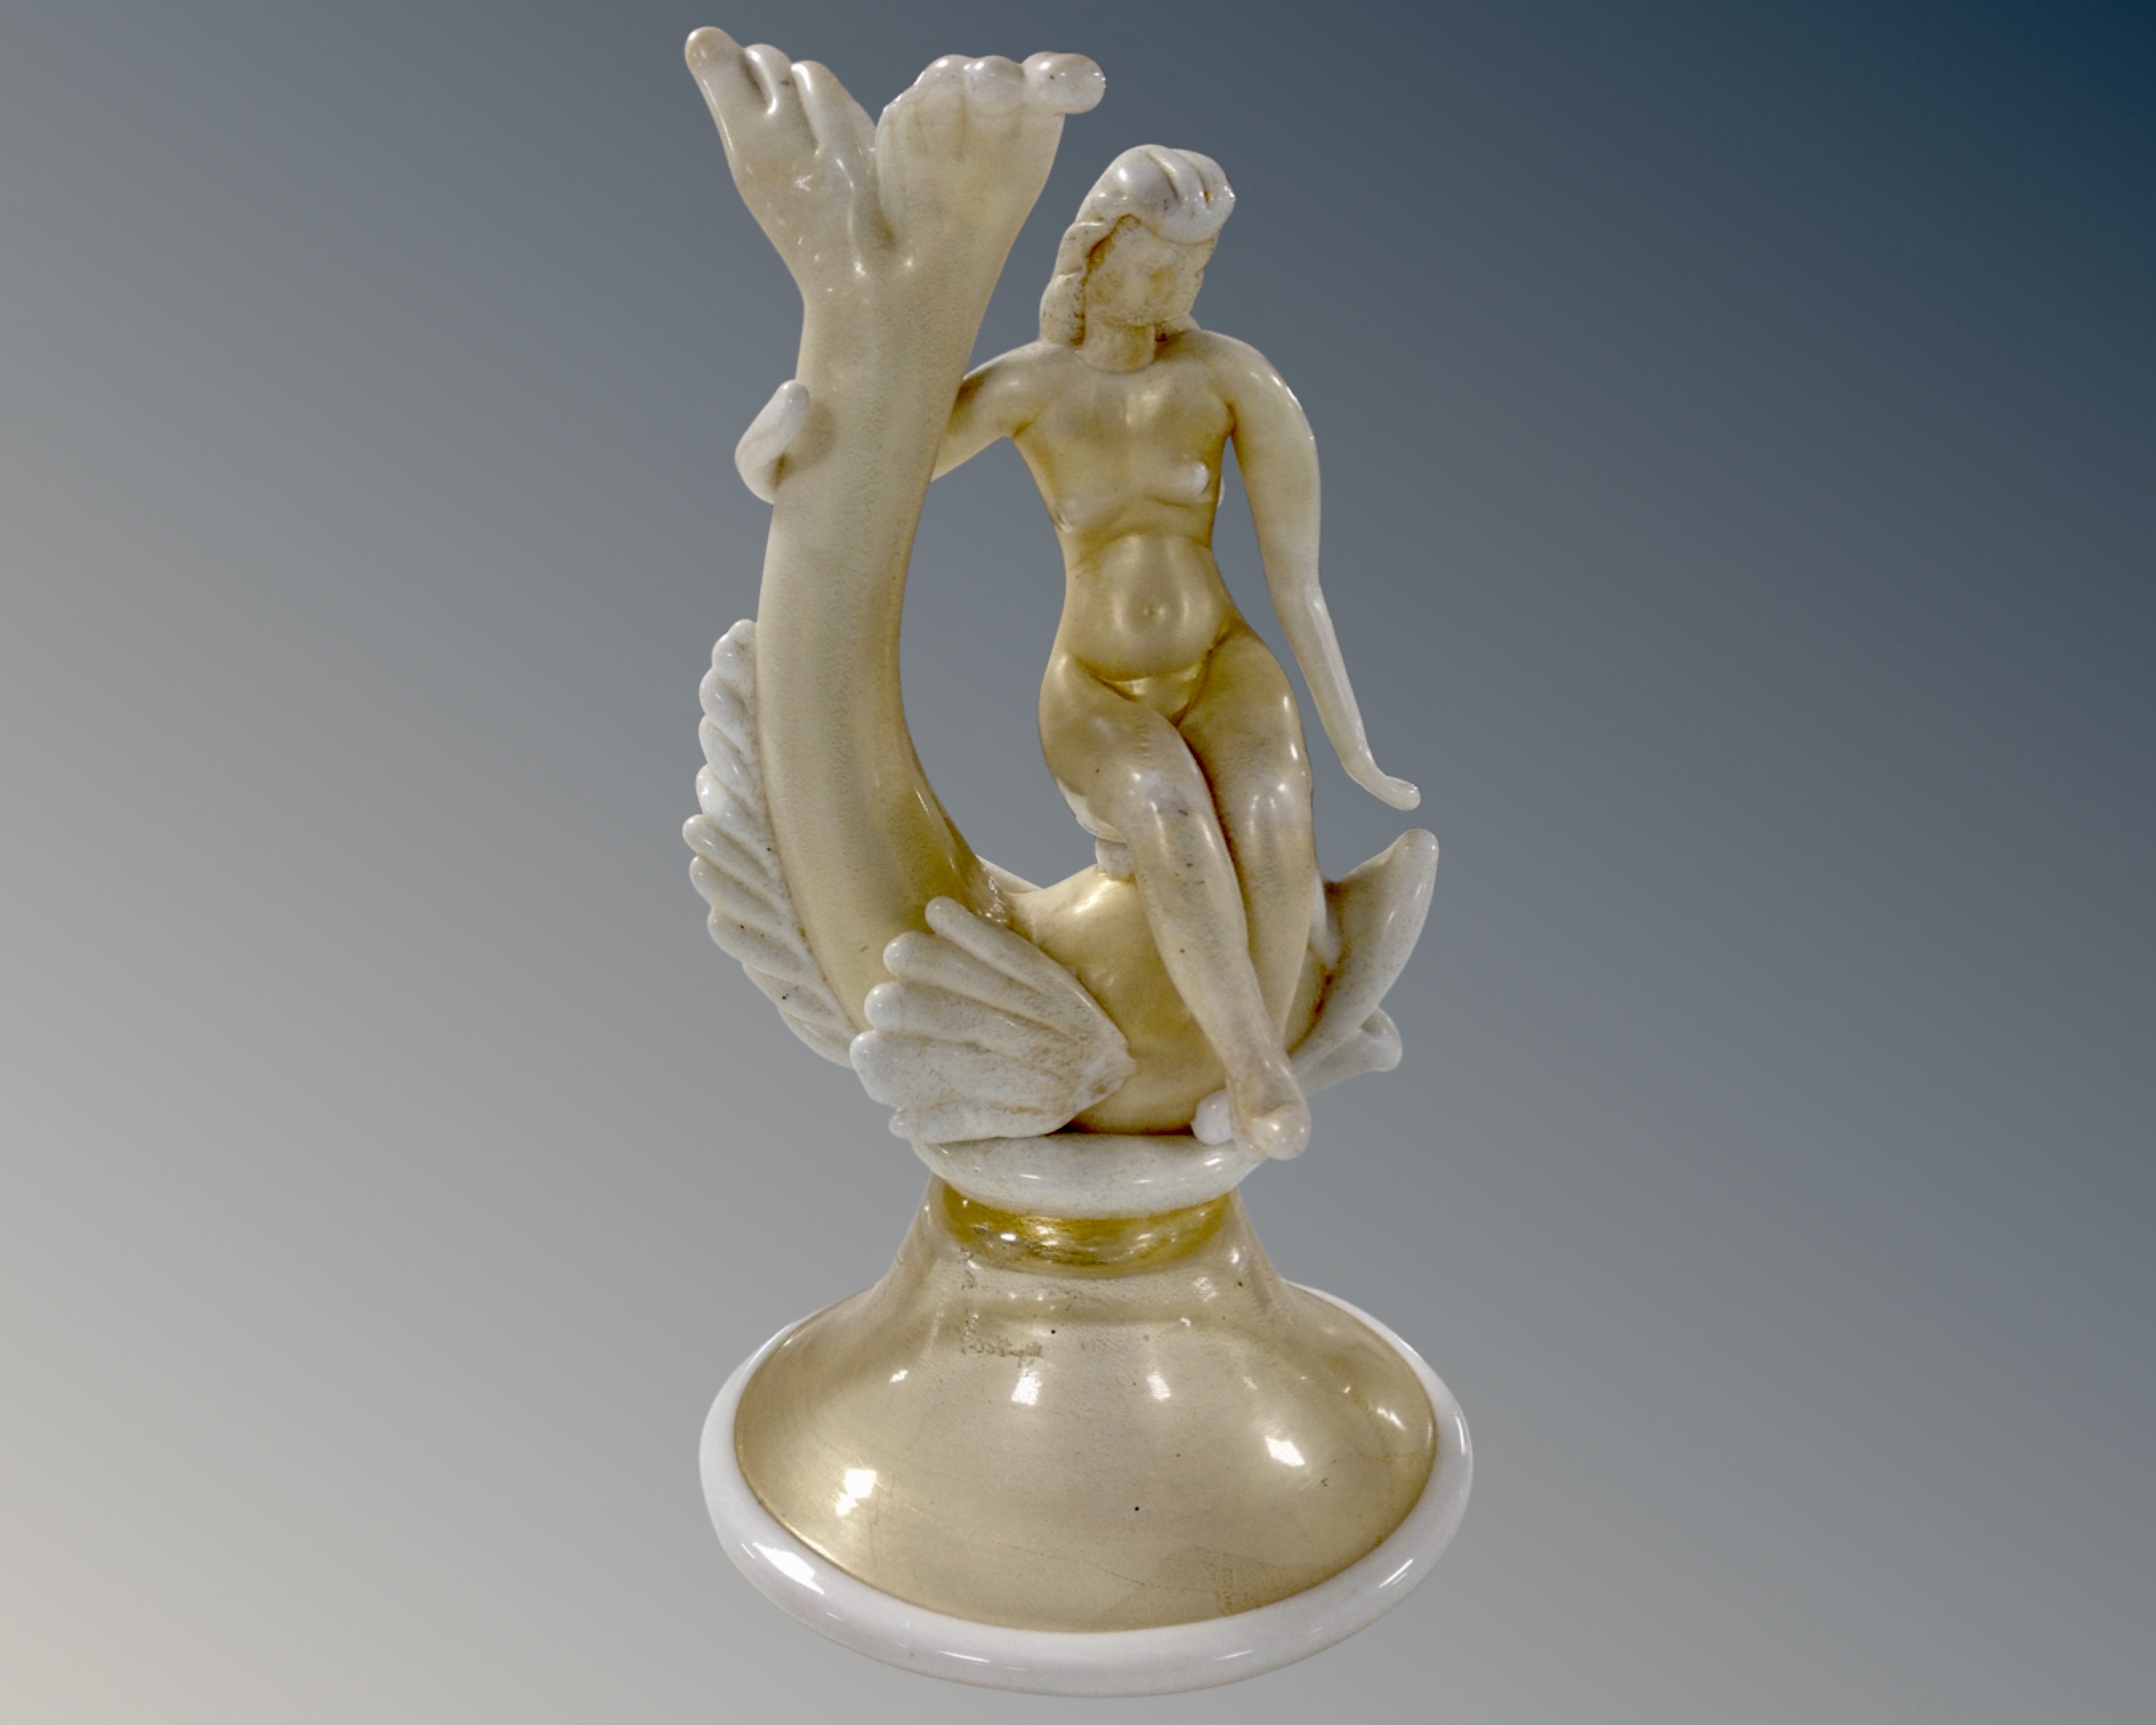 A Venetian glass sculpture of a nude woman sitting on a dolphin, probably by Barovier & Toso.